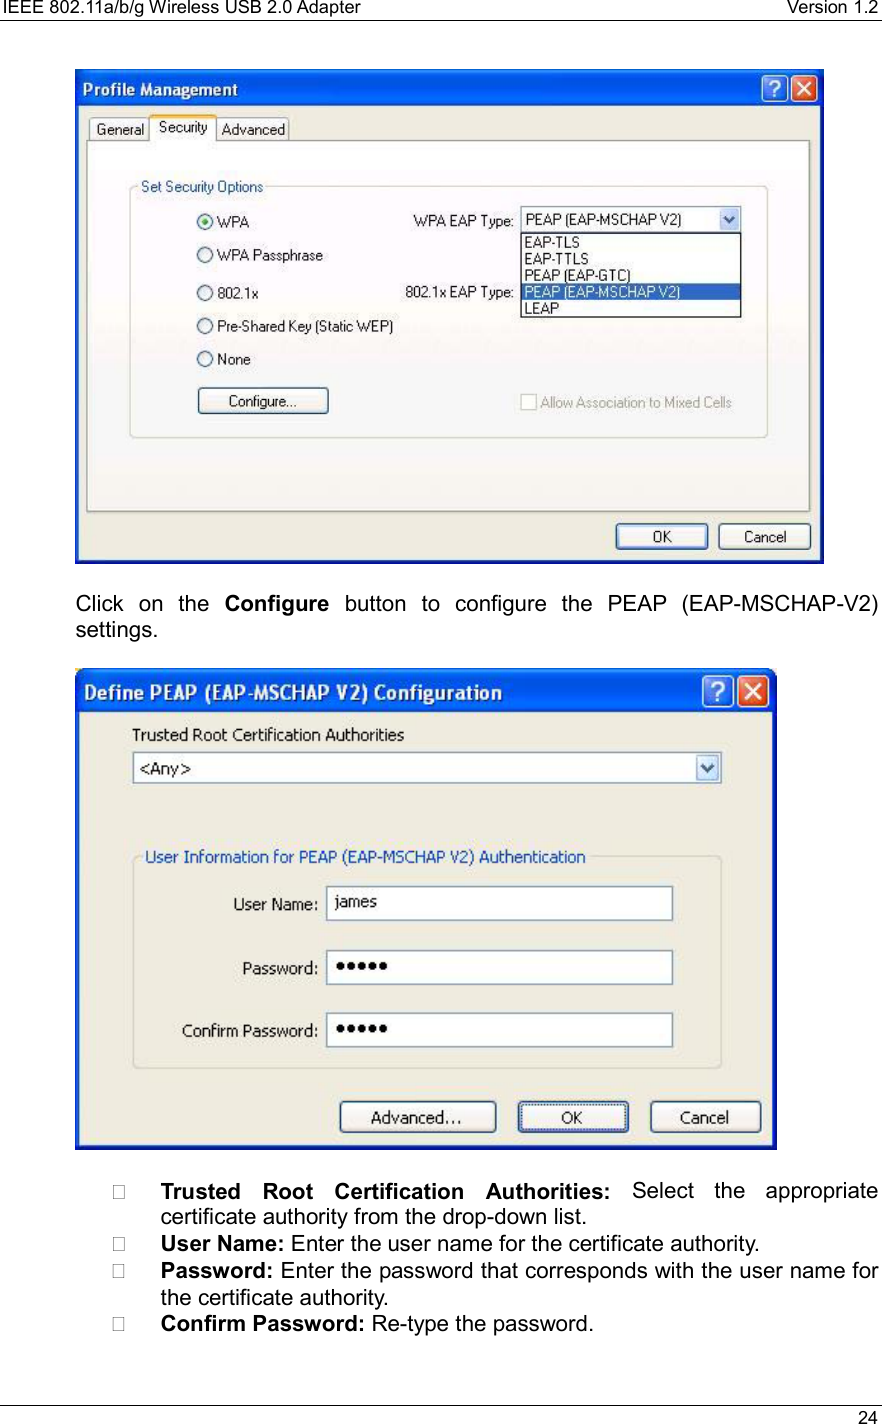 IEEE 802.11a/b/g Wireless USB 2.0 Adapter    Version 1.2   24    Click on the Configure button to configure the PEAP (EAP-MSCHAP-V2) settings.      Trusted Root Certification Authorities: Select the appropriate certificate authority from the drop-down list.     User Name: Enter the user name for the certificate authority.   Password: Enter the password that corresponds with the user name for the certificate authority.   Confirm Password: Re-type the password.   